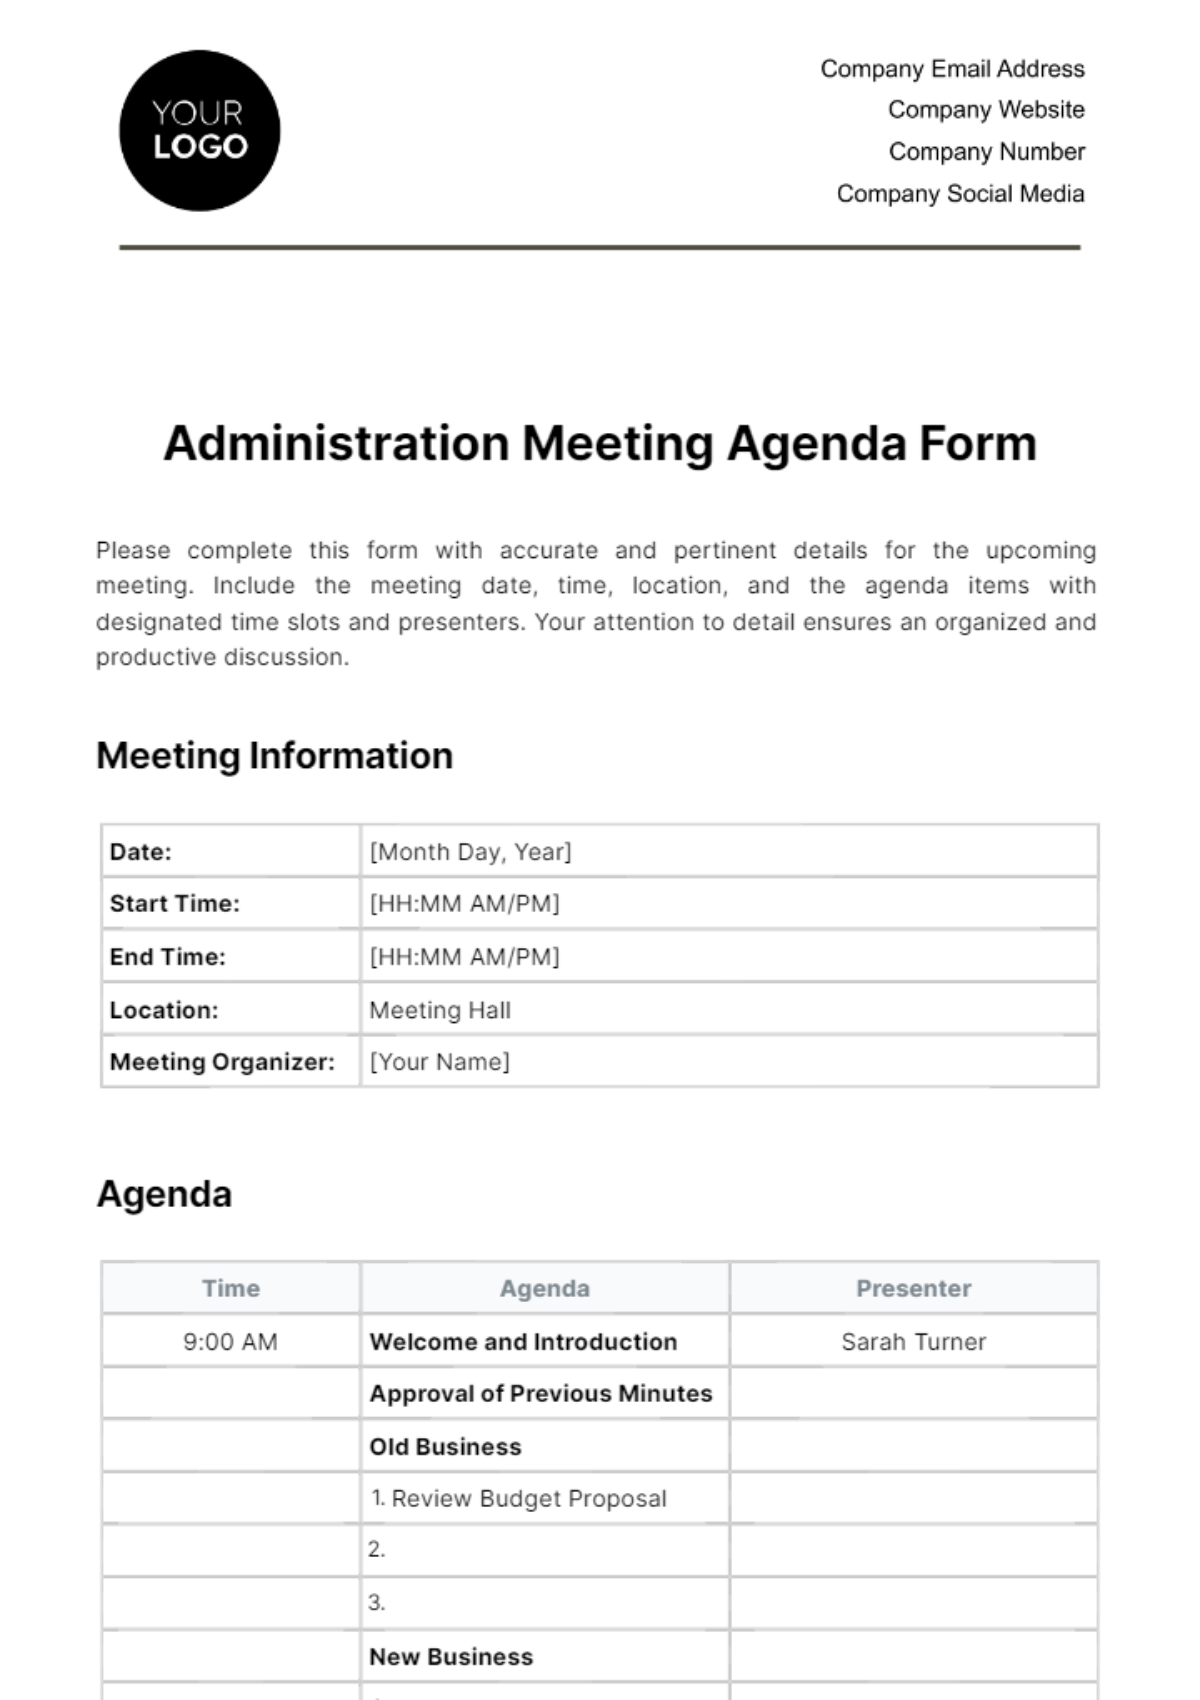 Free Administration Meeting Agenda Form Template